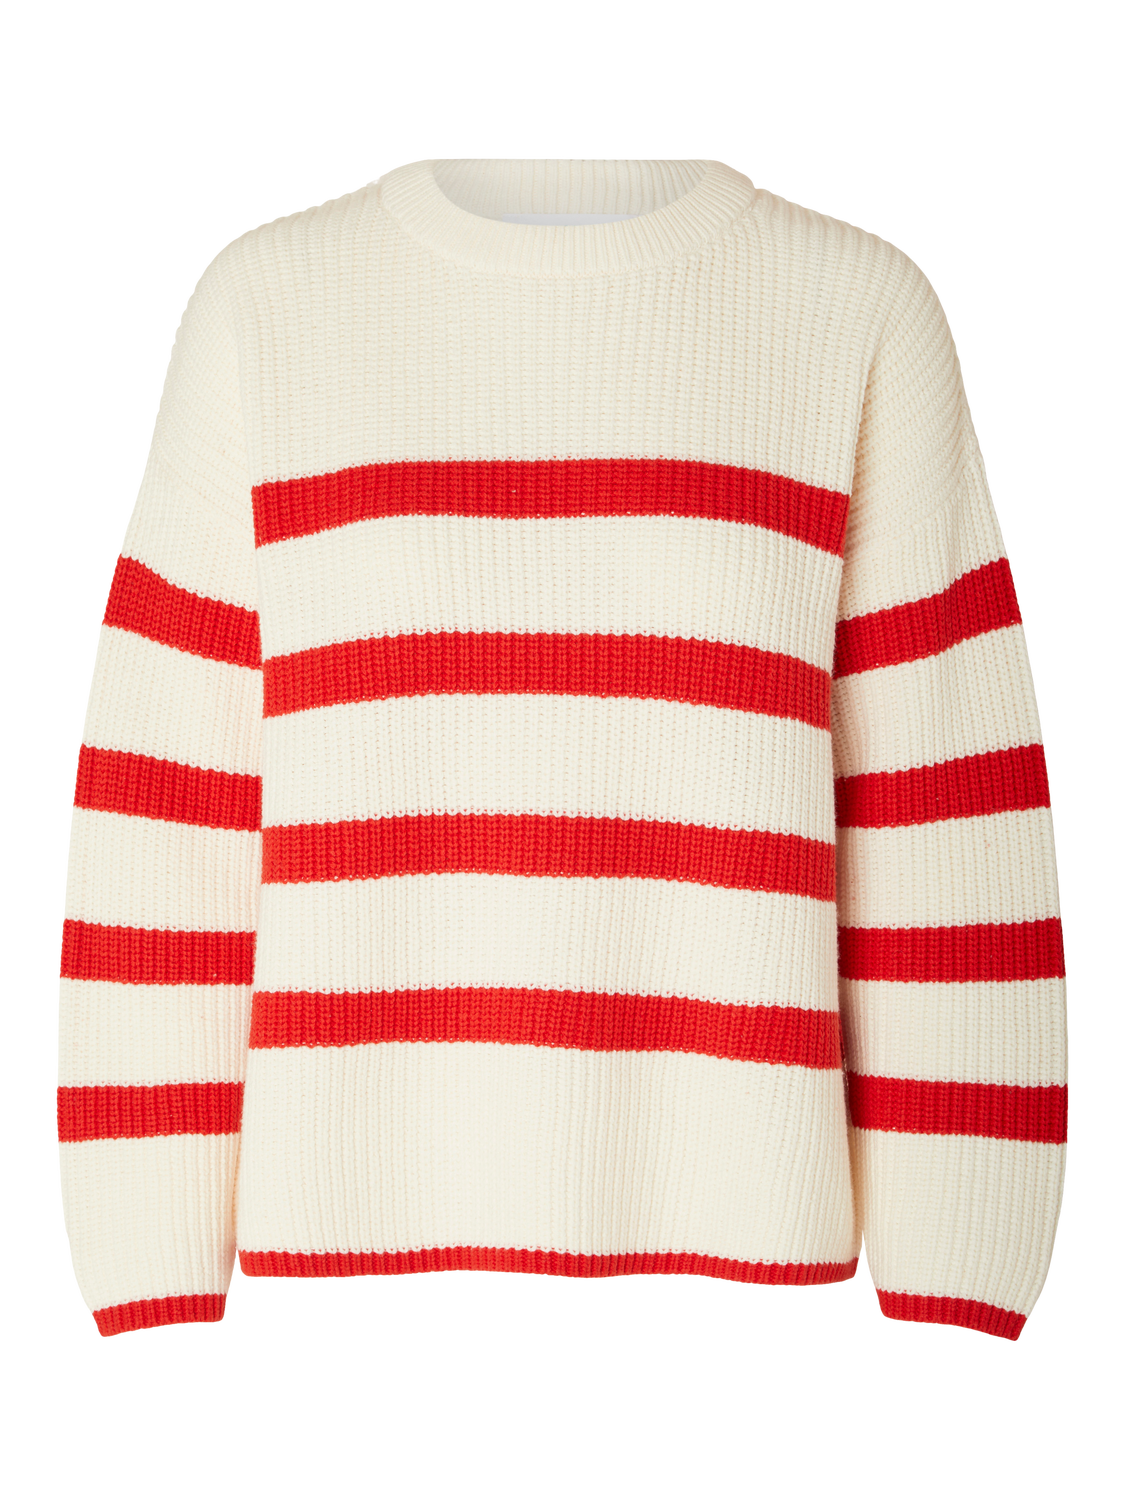 Bloomie Ls Knit O-Neck - Snow White/Flame Scarlet